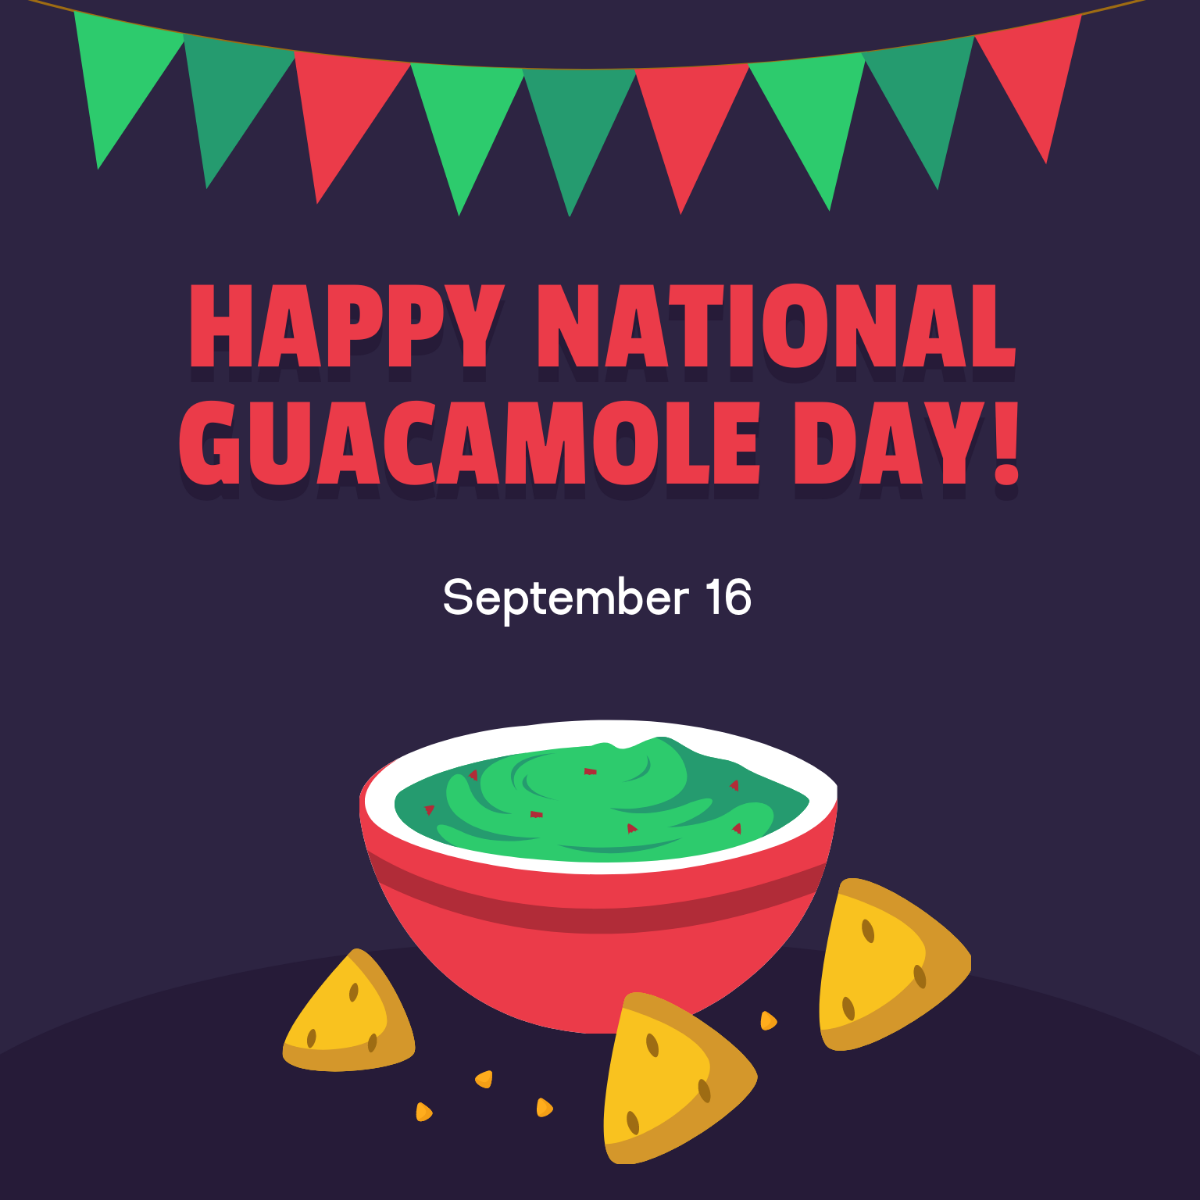 Free National Guacamole Day Flyer Vector Template